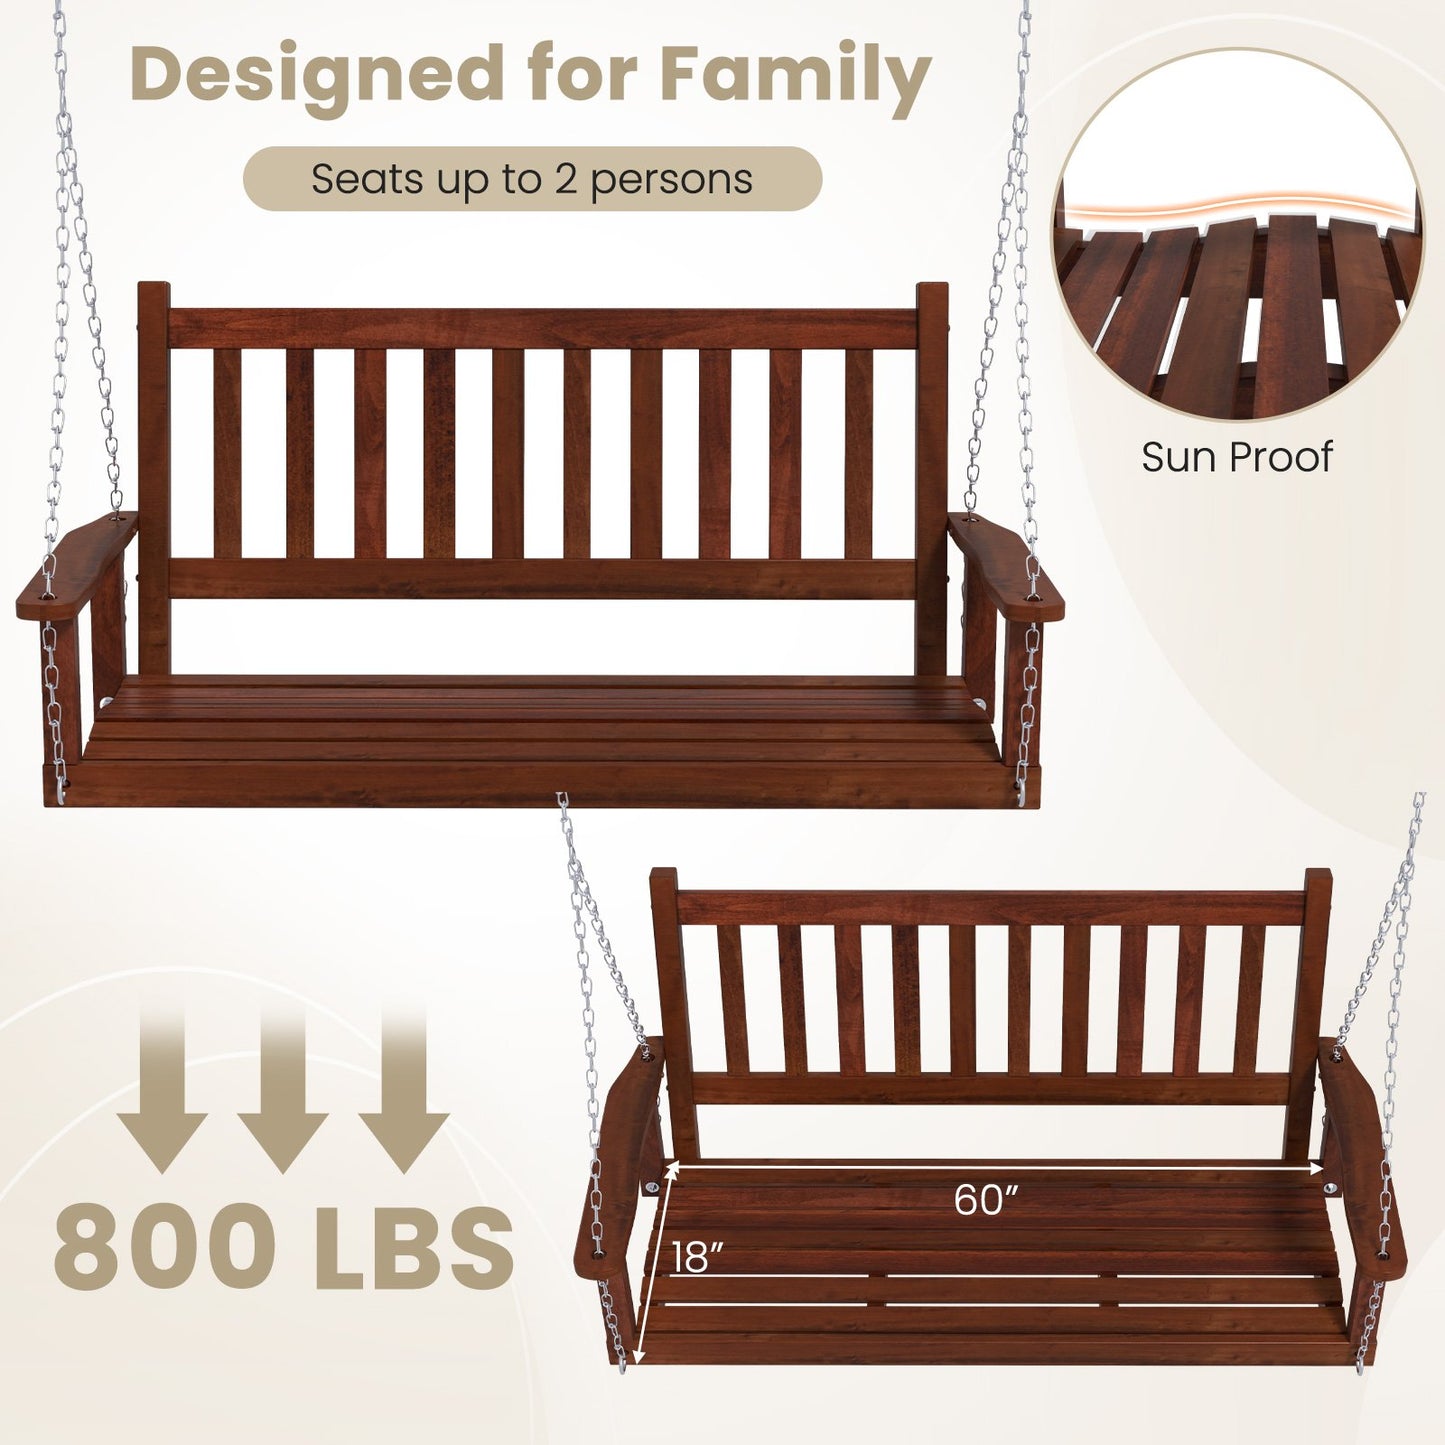 3-Person Wooden Outdoor Porch Swing with 800 lbs Weight Capacity, Brown